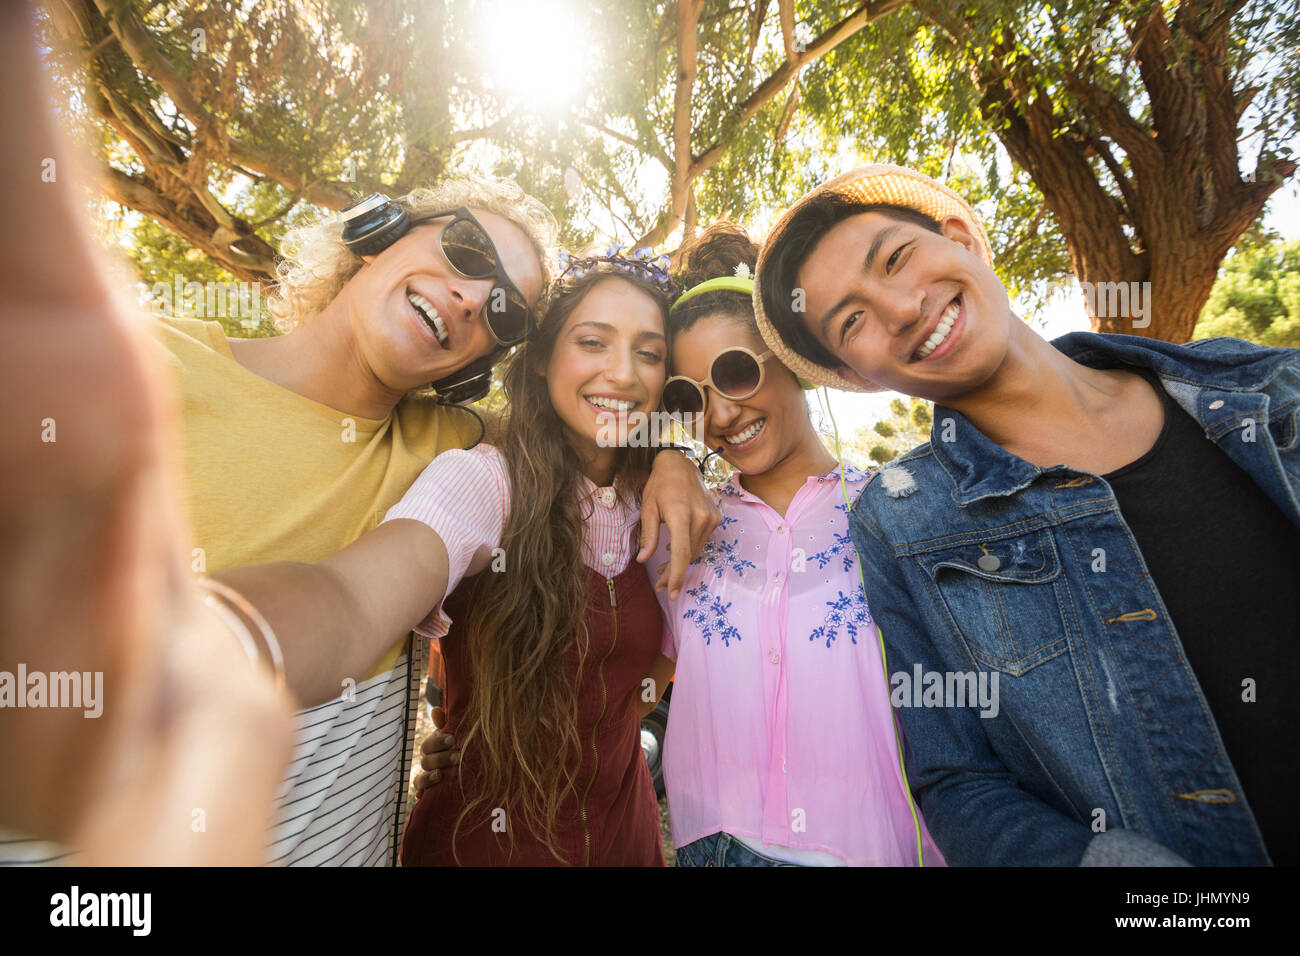 Portrait of smiling friends standing side by side against trees on sunny day Stock Photo